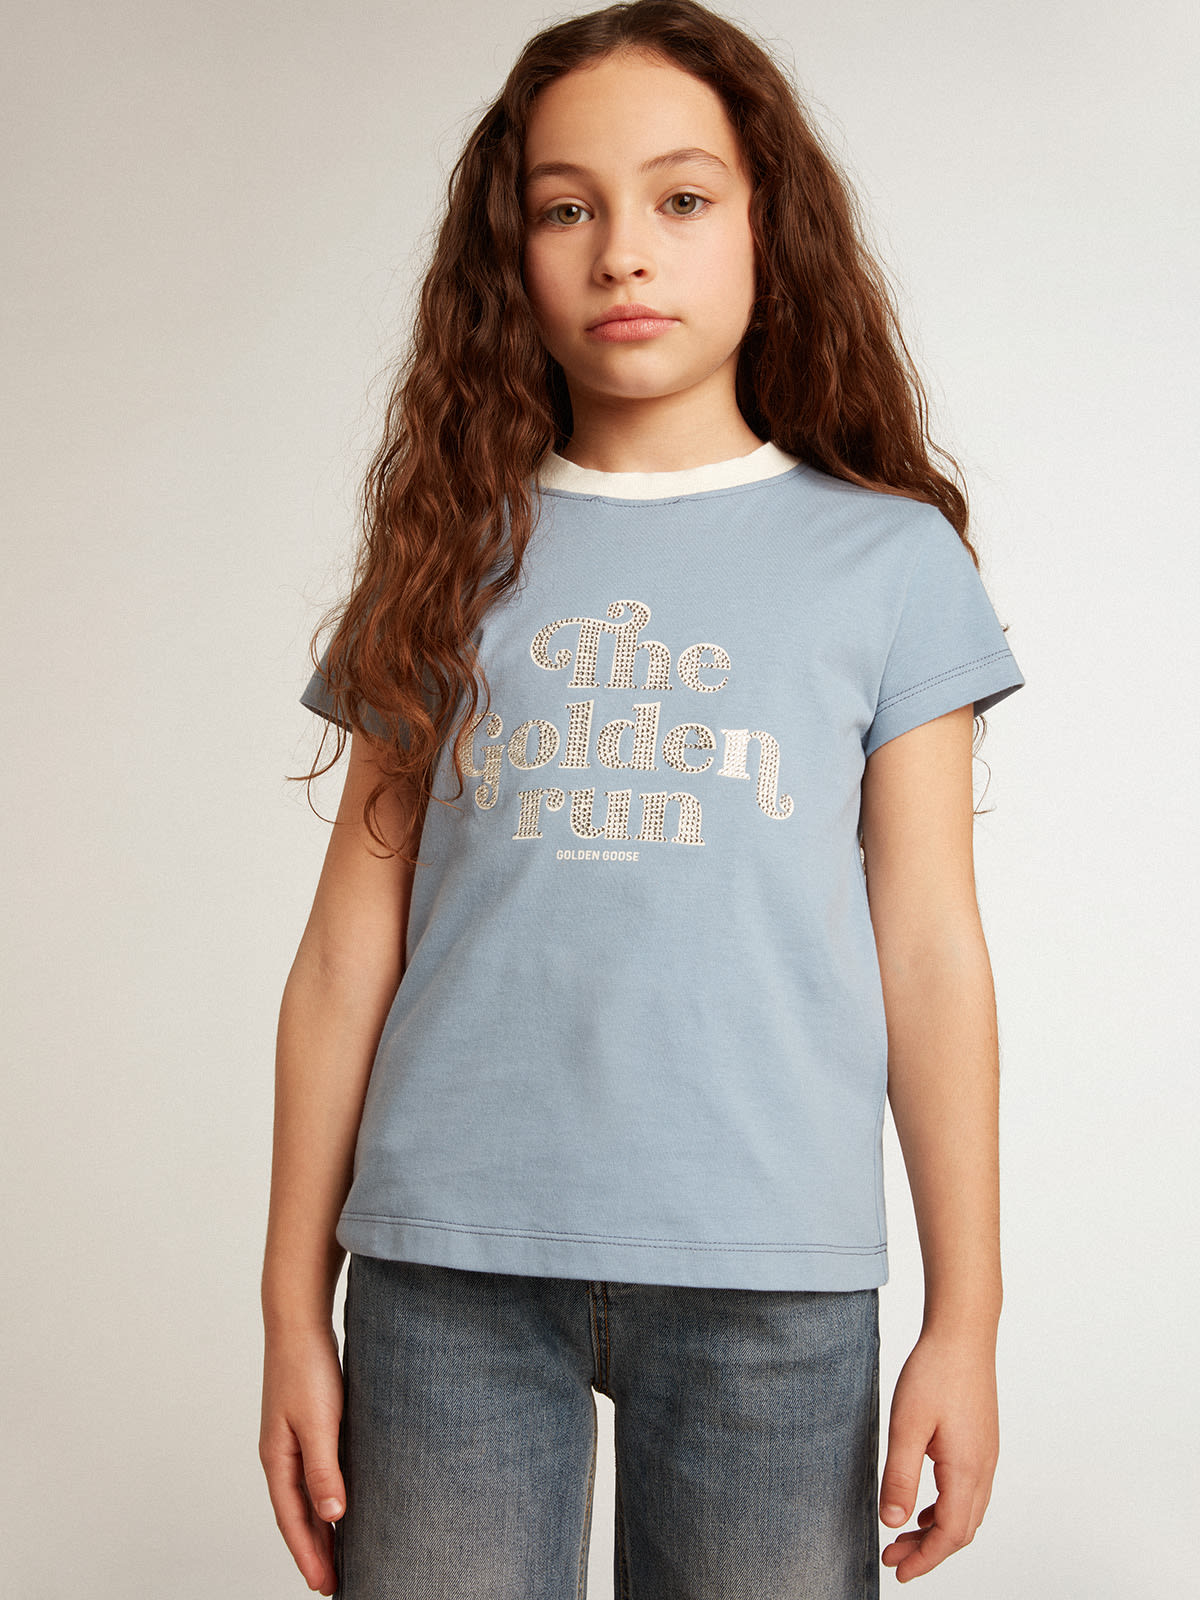 Golden Goose - Girls’ light blue cotton T-shirt with print and crystals in 